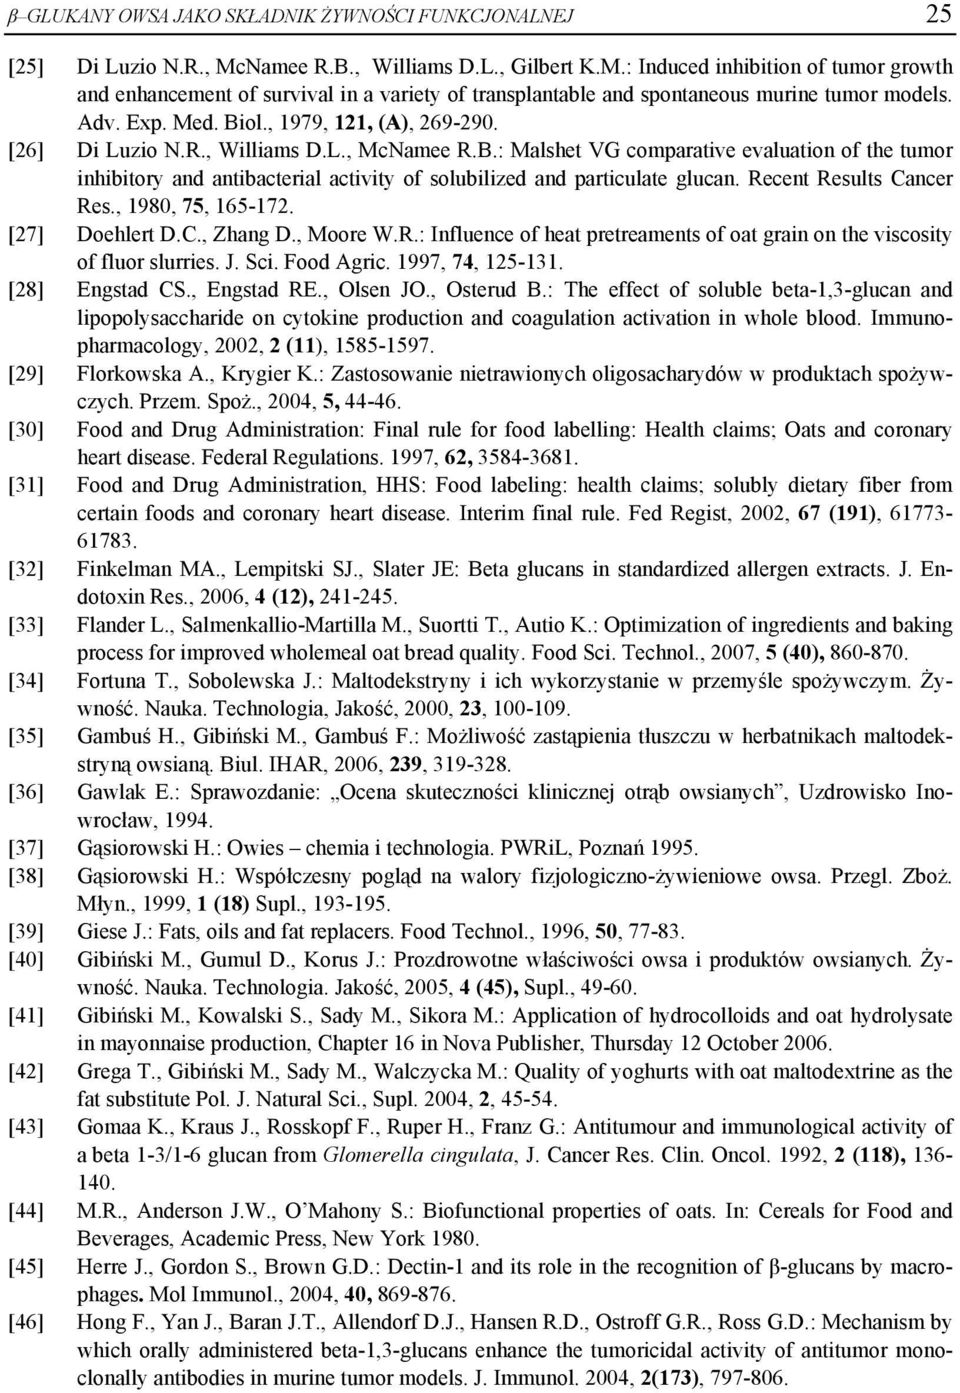 , 1979, 121, (A), 269-290. [26] Di Luzio N.R., Williams D.L., McNamee R.B.: Malshet VG comparative evaluation of the tumor inhibitory and antibacterial activity of solubilized and particulate glucan.